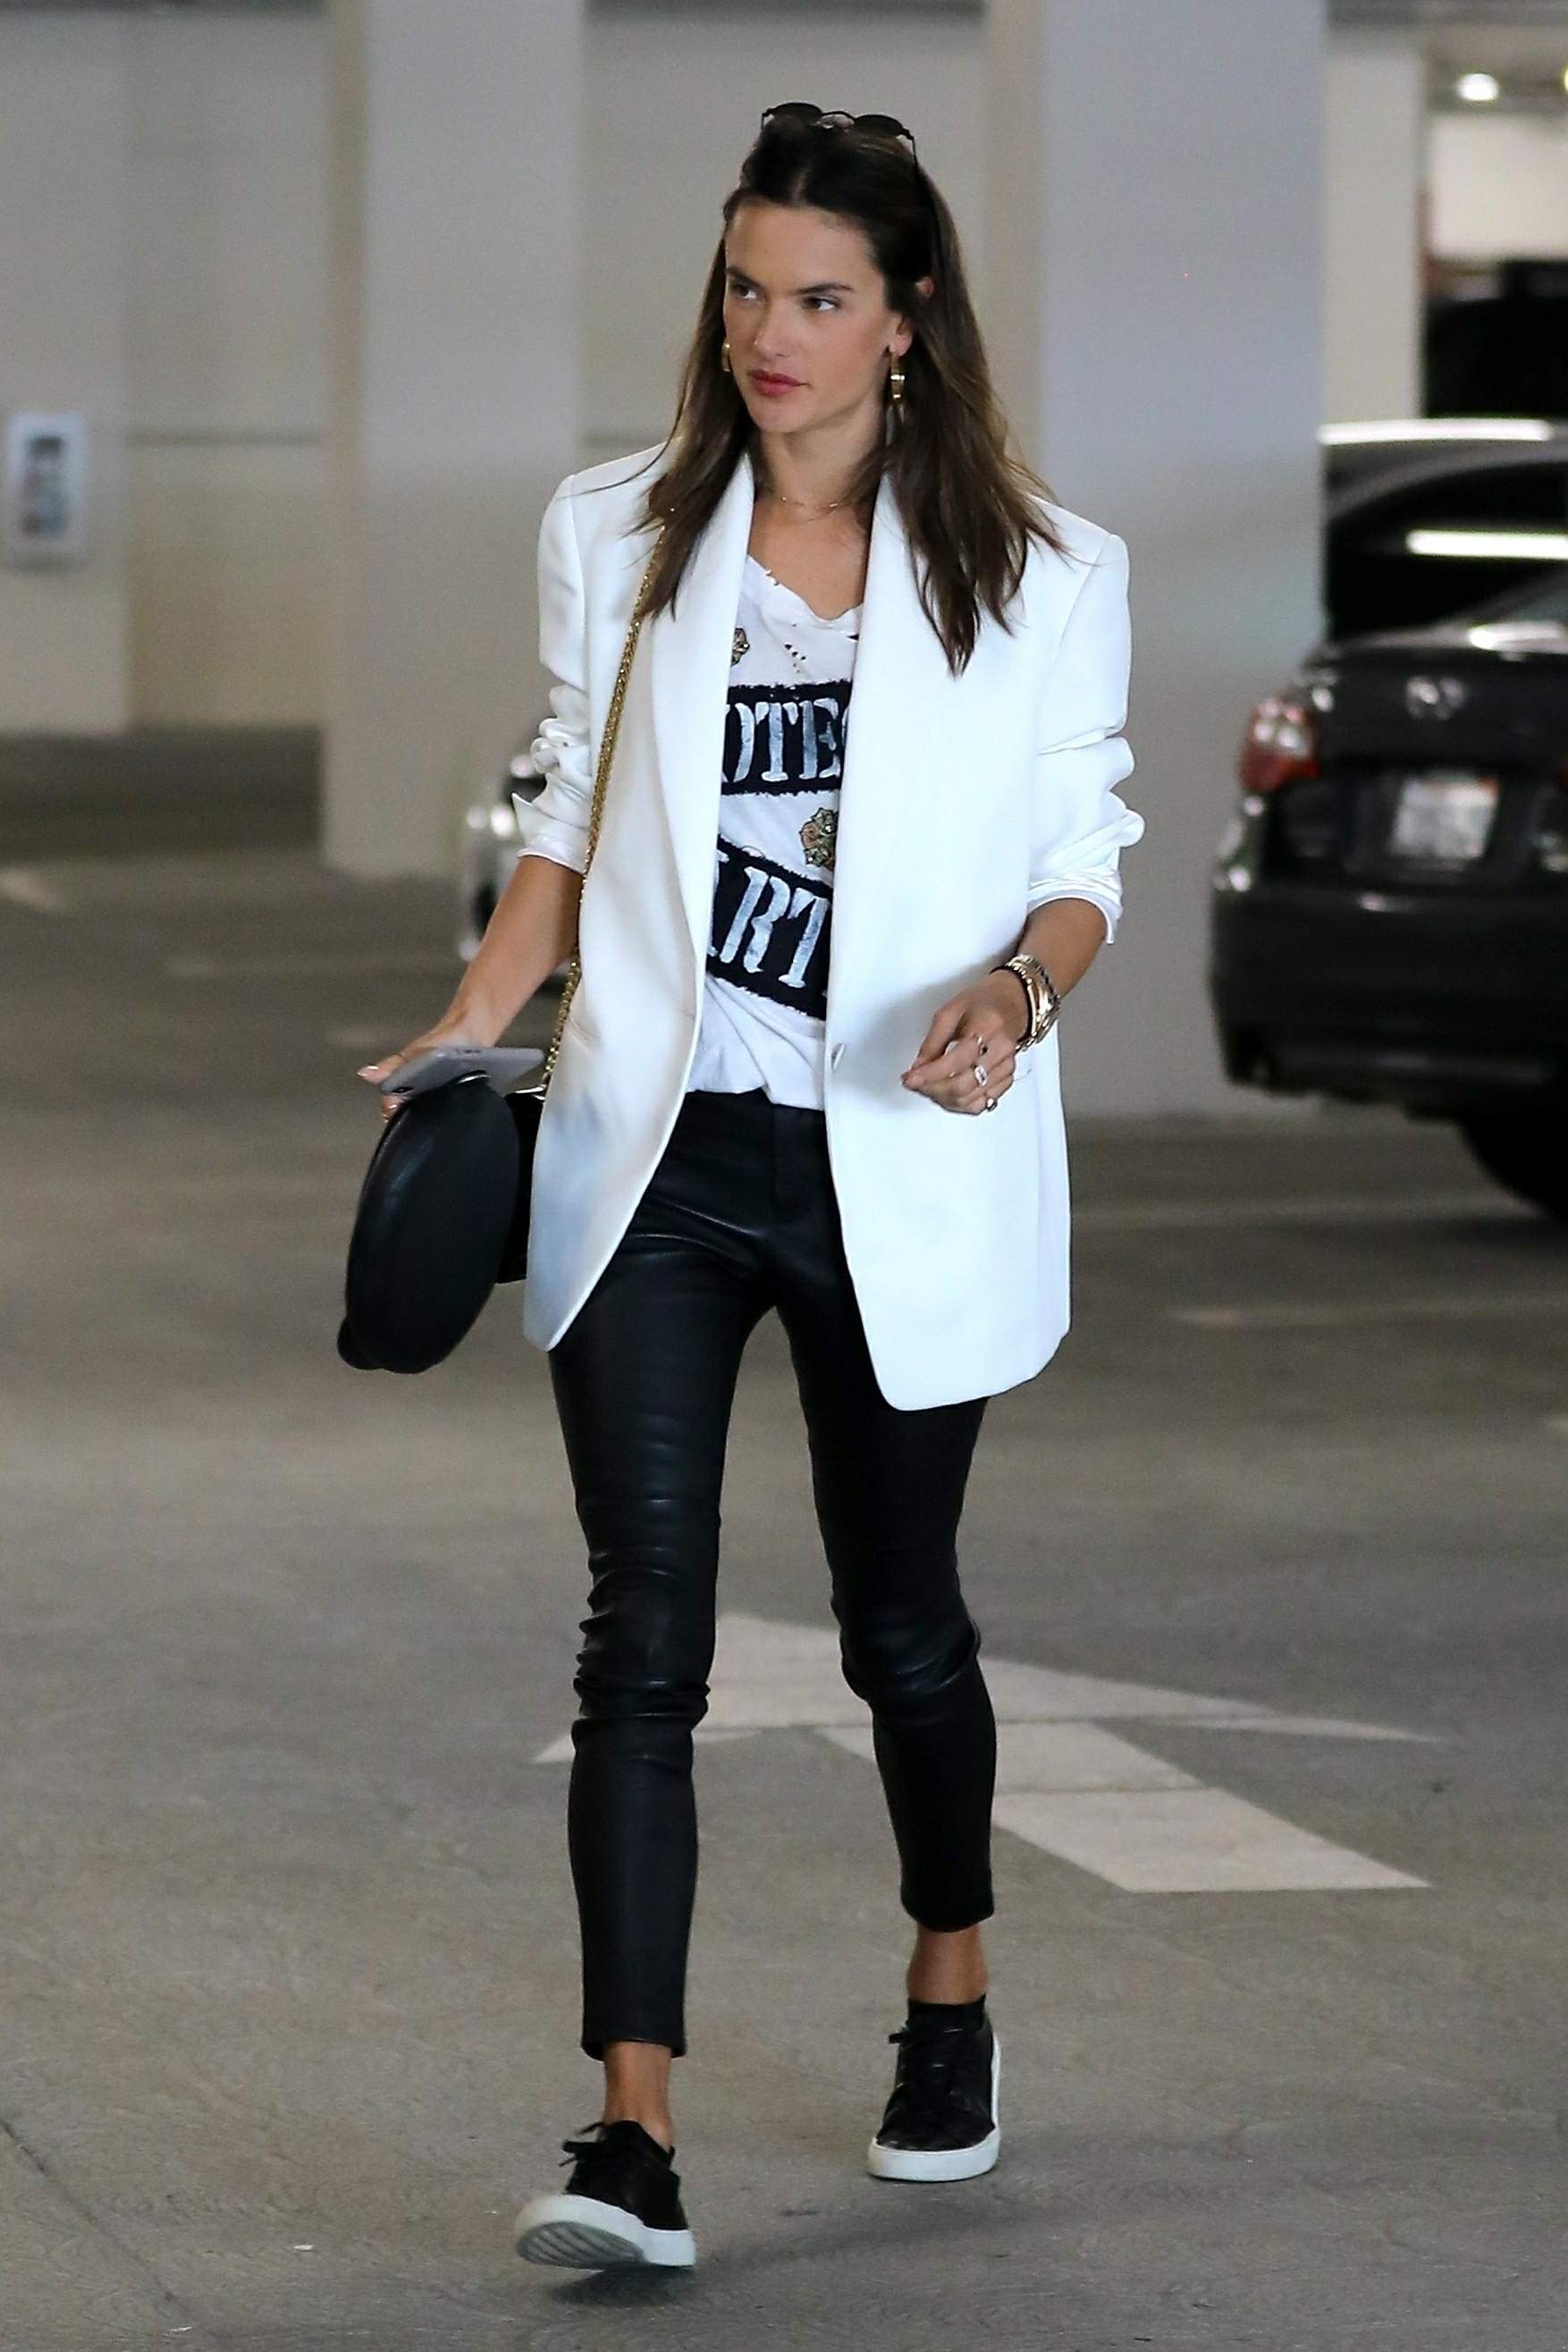 Alessandra Ambrosio has a lunch date